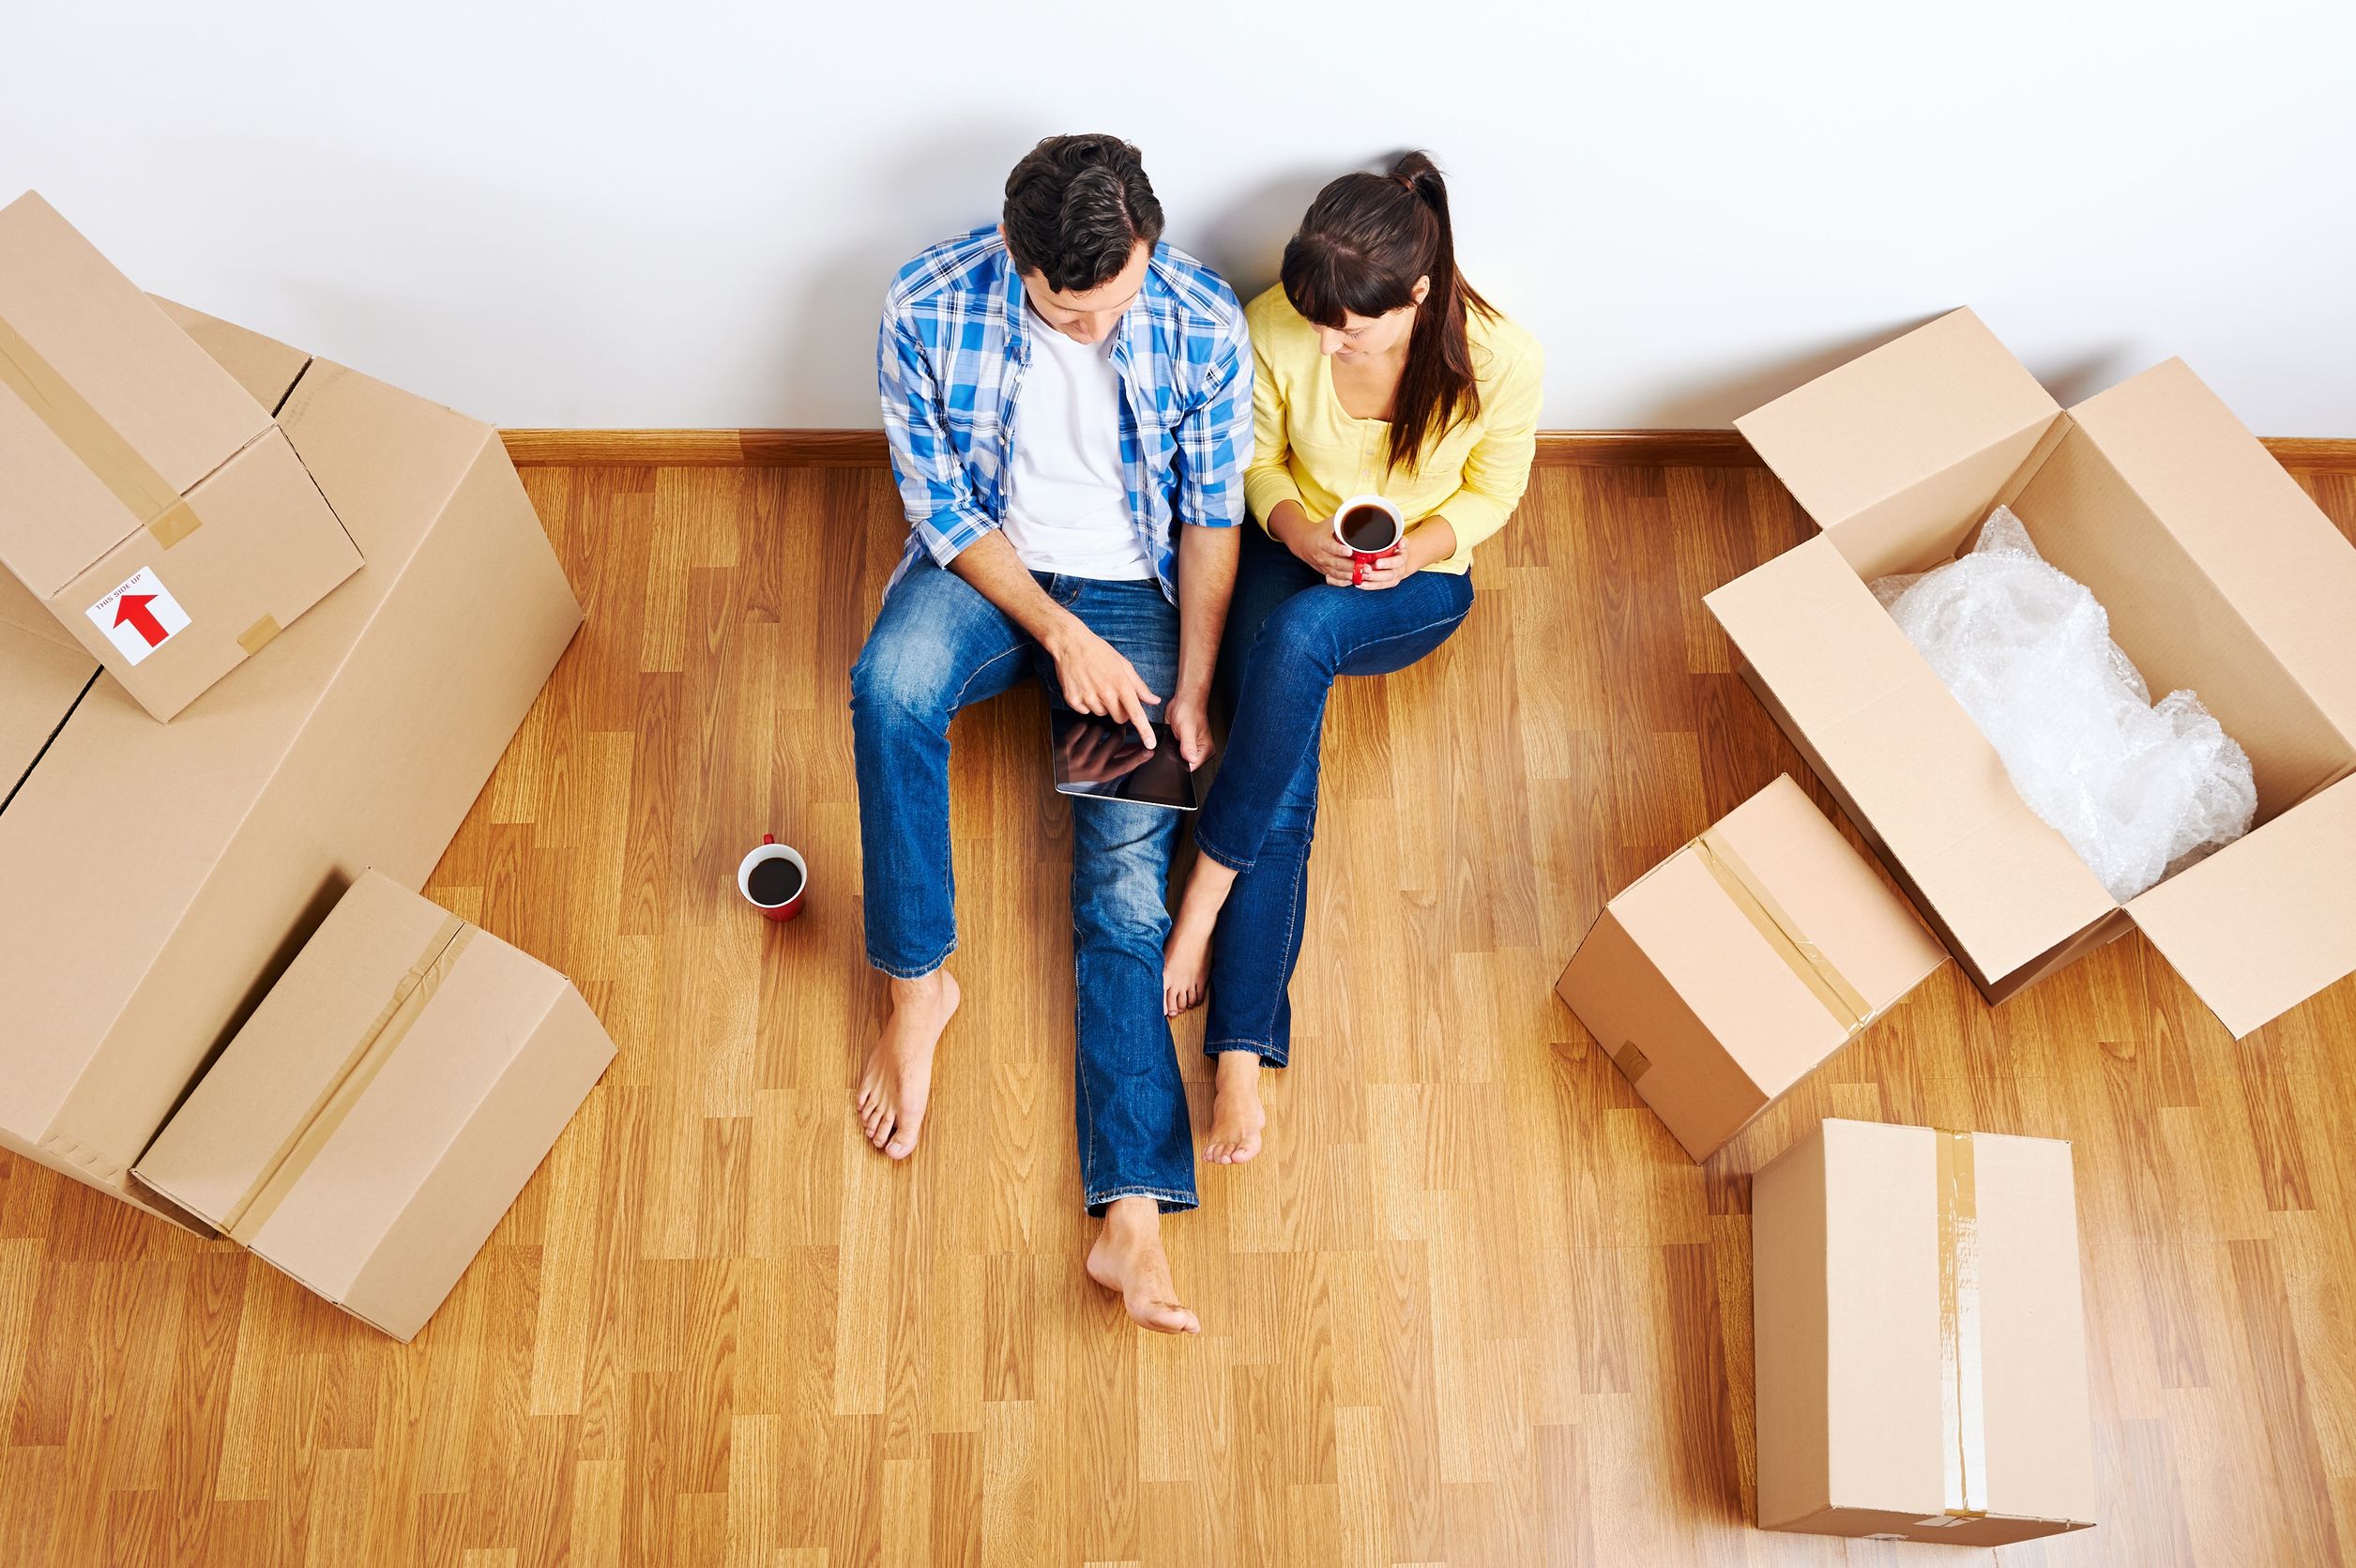 How to Find the Right Apartment for You